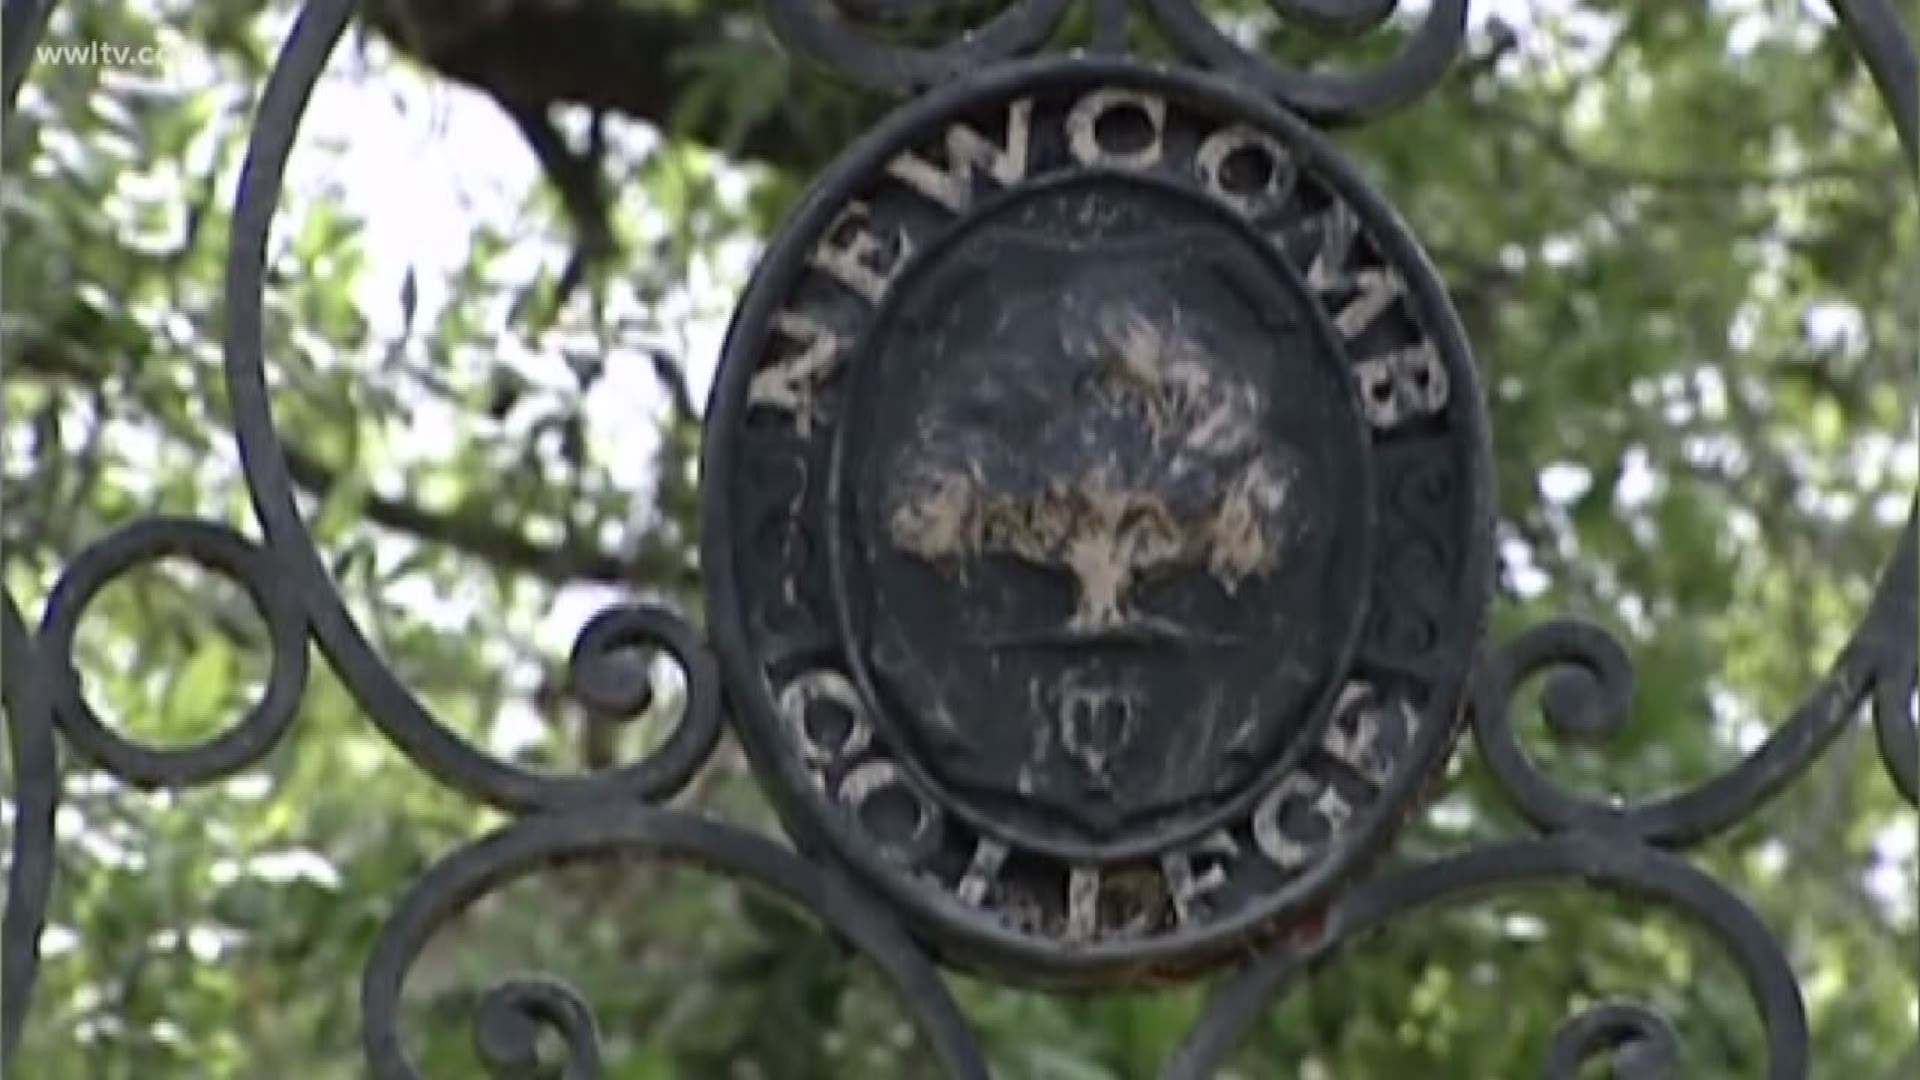 Newcomb College Institute is under investigation by the civil rights division of the Education Department over a claim that the school is discriminatory towards men.